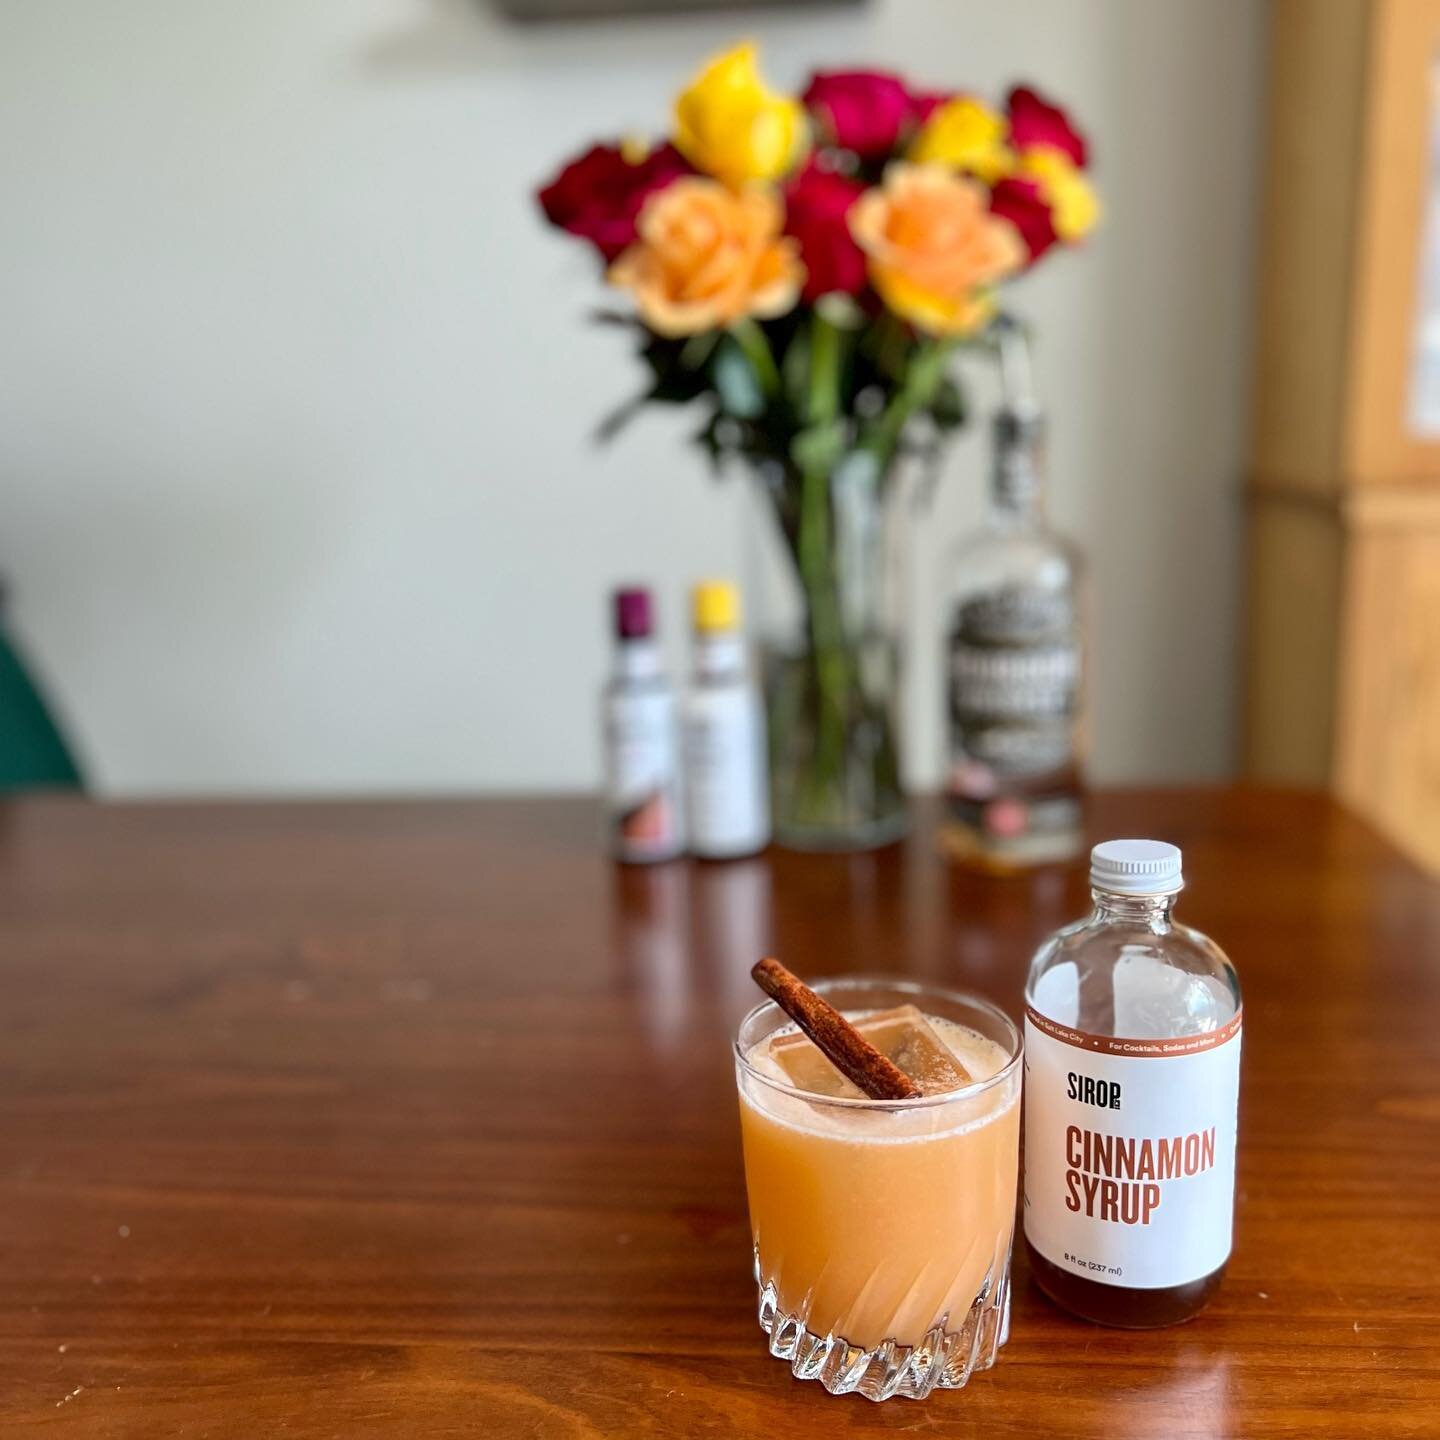 New riff on a Whiskey sour we&rsquo;re calling&hellip;

The Campfire Sour
2oz @shdistillery bourbon
1oz @sirop_co cinnamon syrup
1oz fresh lemon juice
2 dashes @angosturahouse aromatic bitters
1 dash @angosturahouse chocolate bitters

Shake all ingre